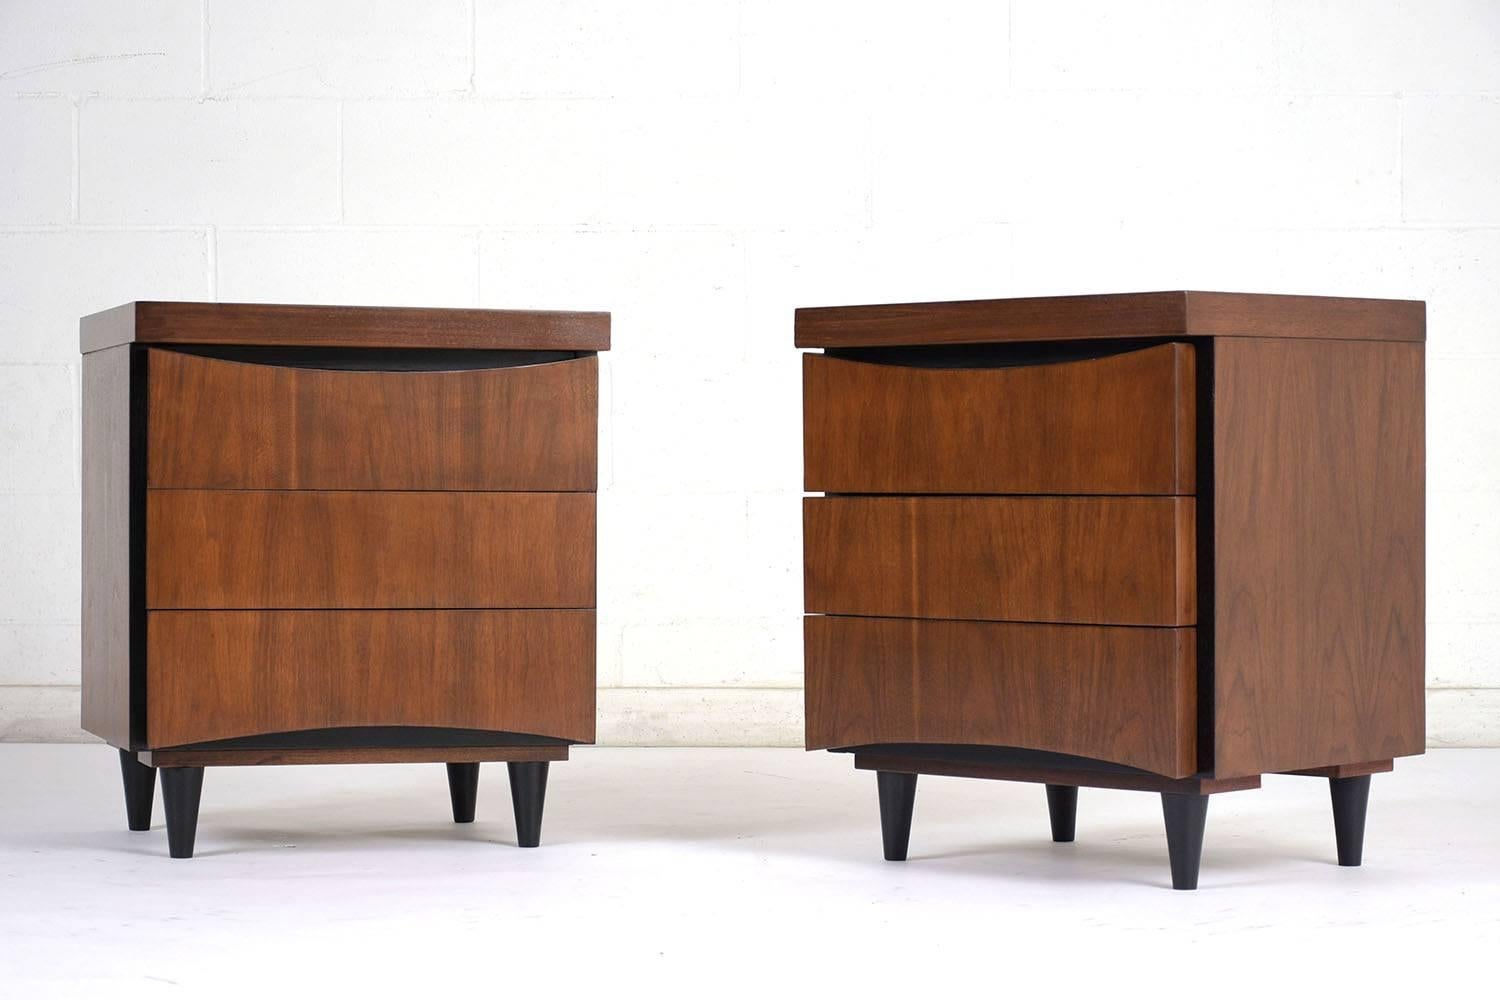 This pair of 1960s American of Martinsville nightstands features ample storage with three drawers. The nightstands have been completely restored and stained in a rich walnut color with black accents. The clean front of the nightstands is made